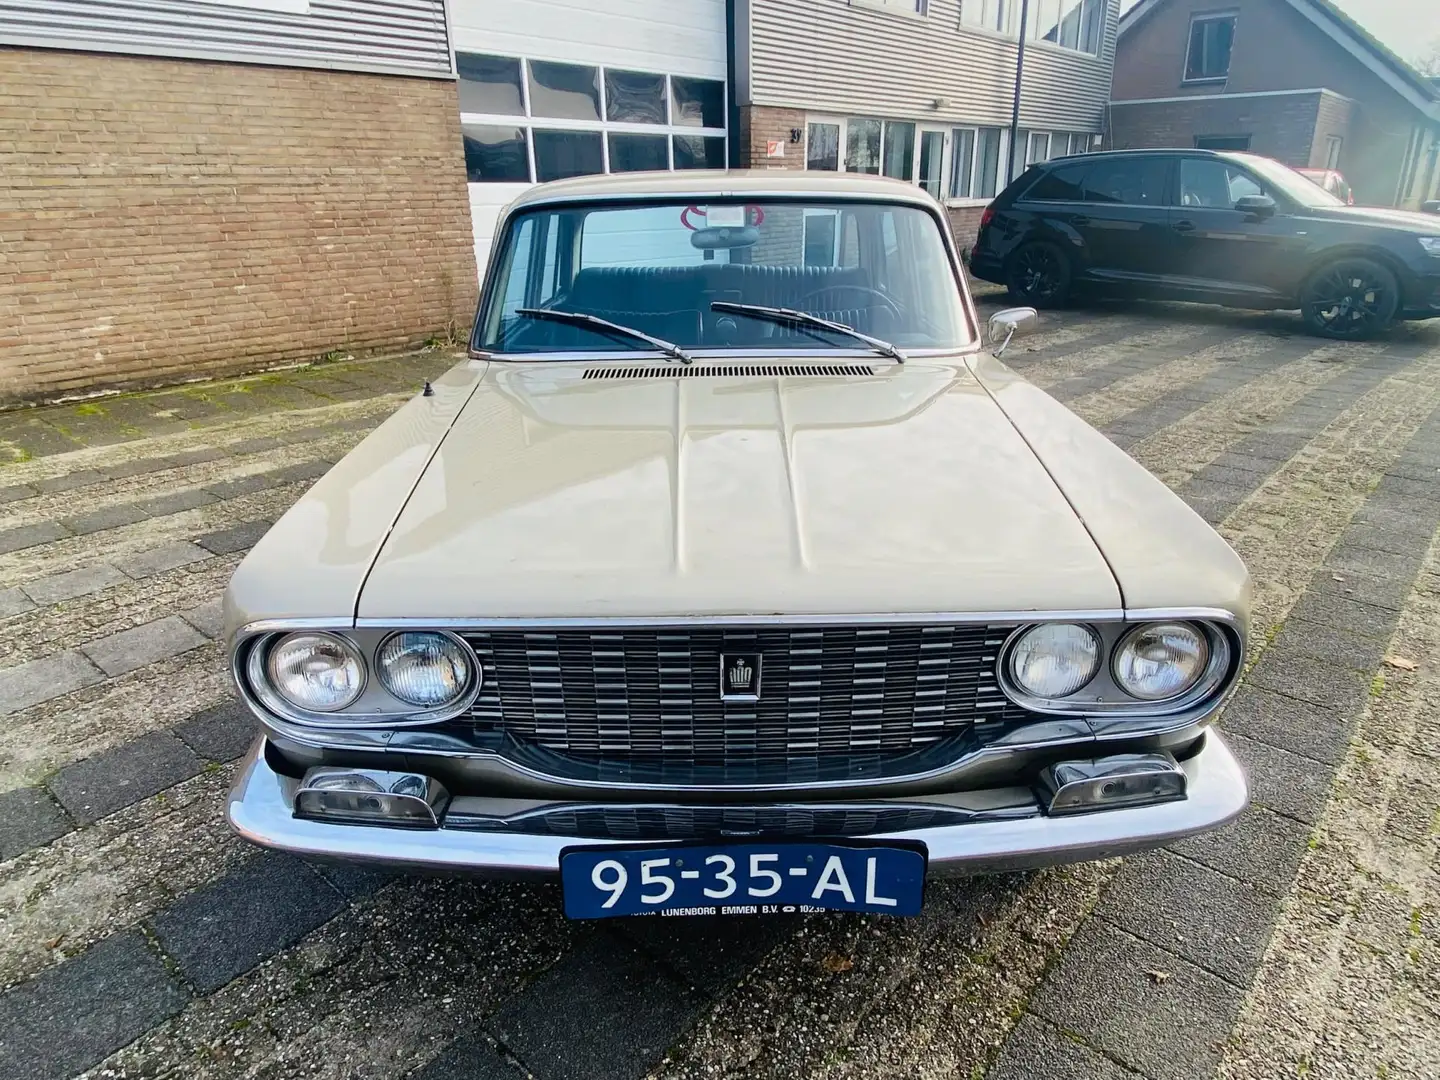 Toyota Crown RS 41 L 1965 opknapper siva - 2